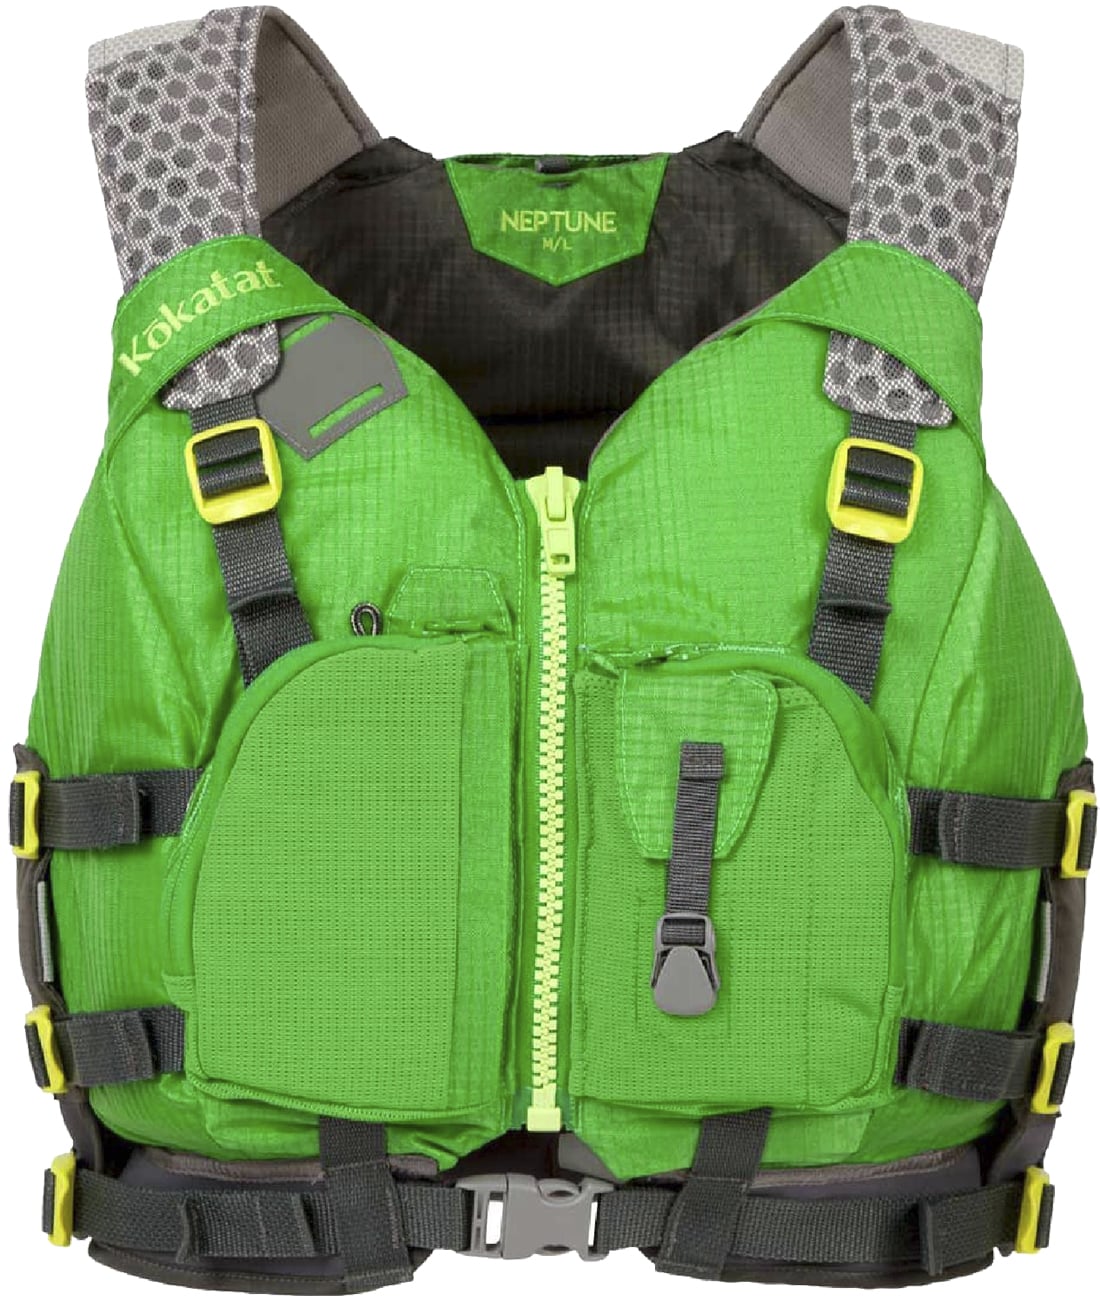 Kokatat Neptune: Best PFD for Expedition/Touring SUP